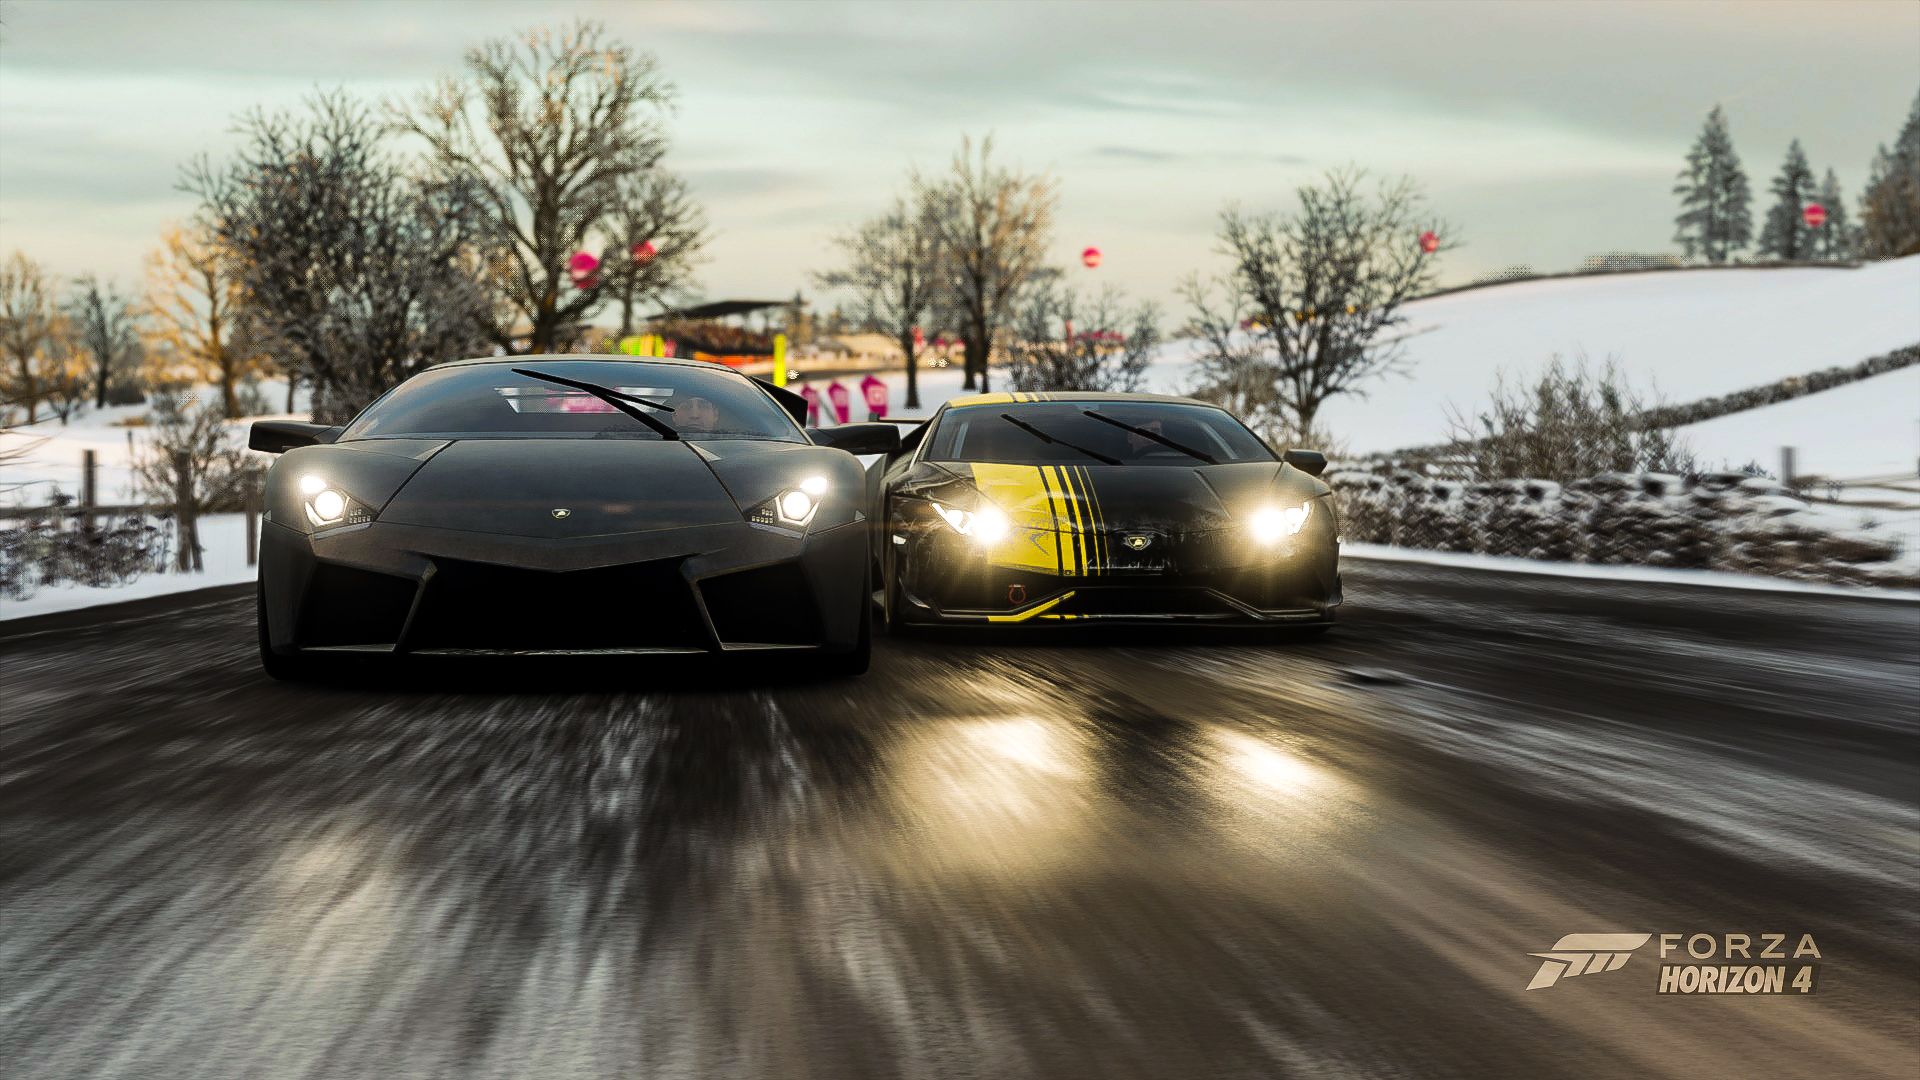 Supercars in the winter are a good time